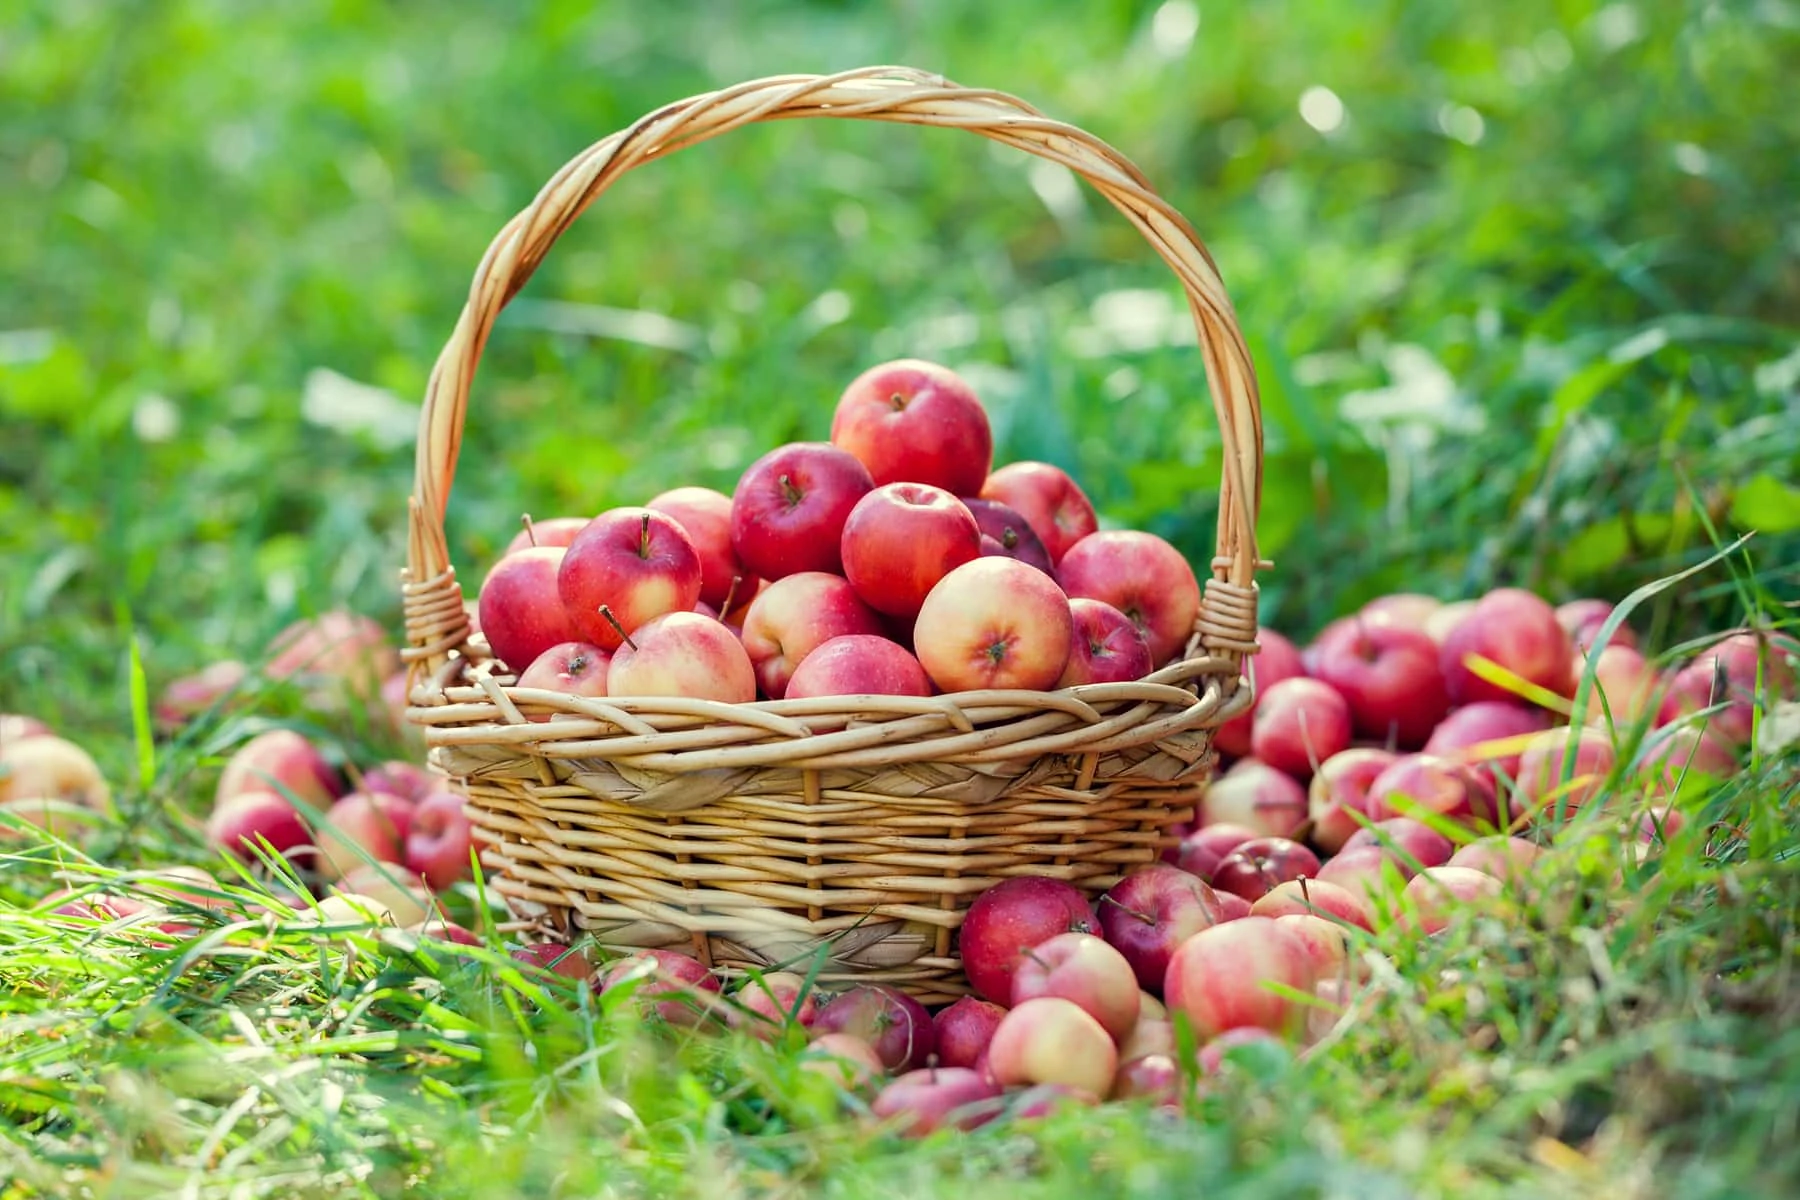 Basket with red apples on the grass